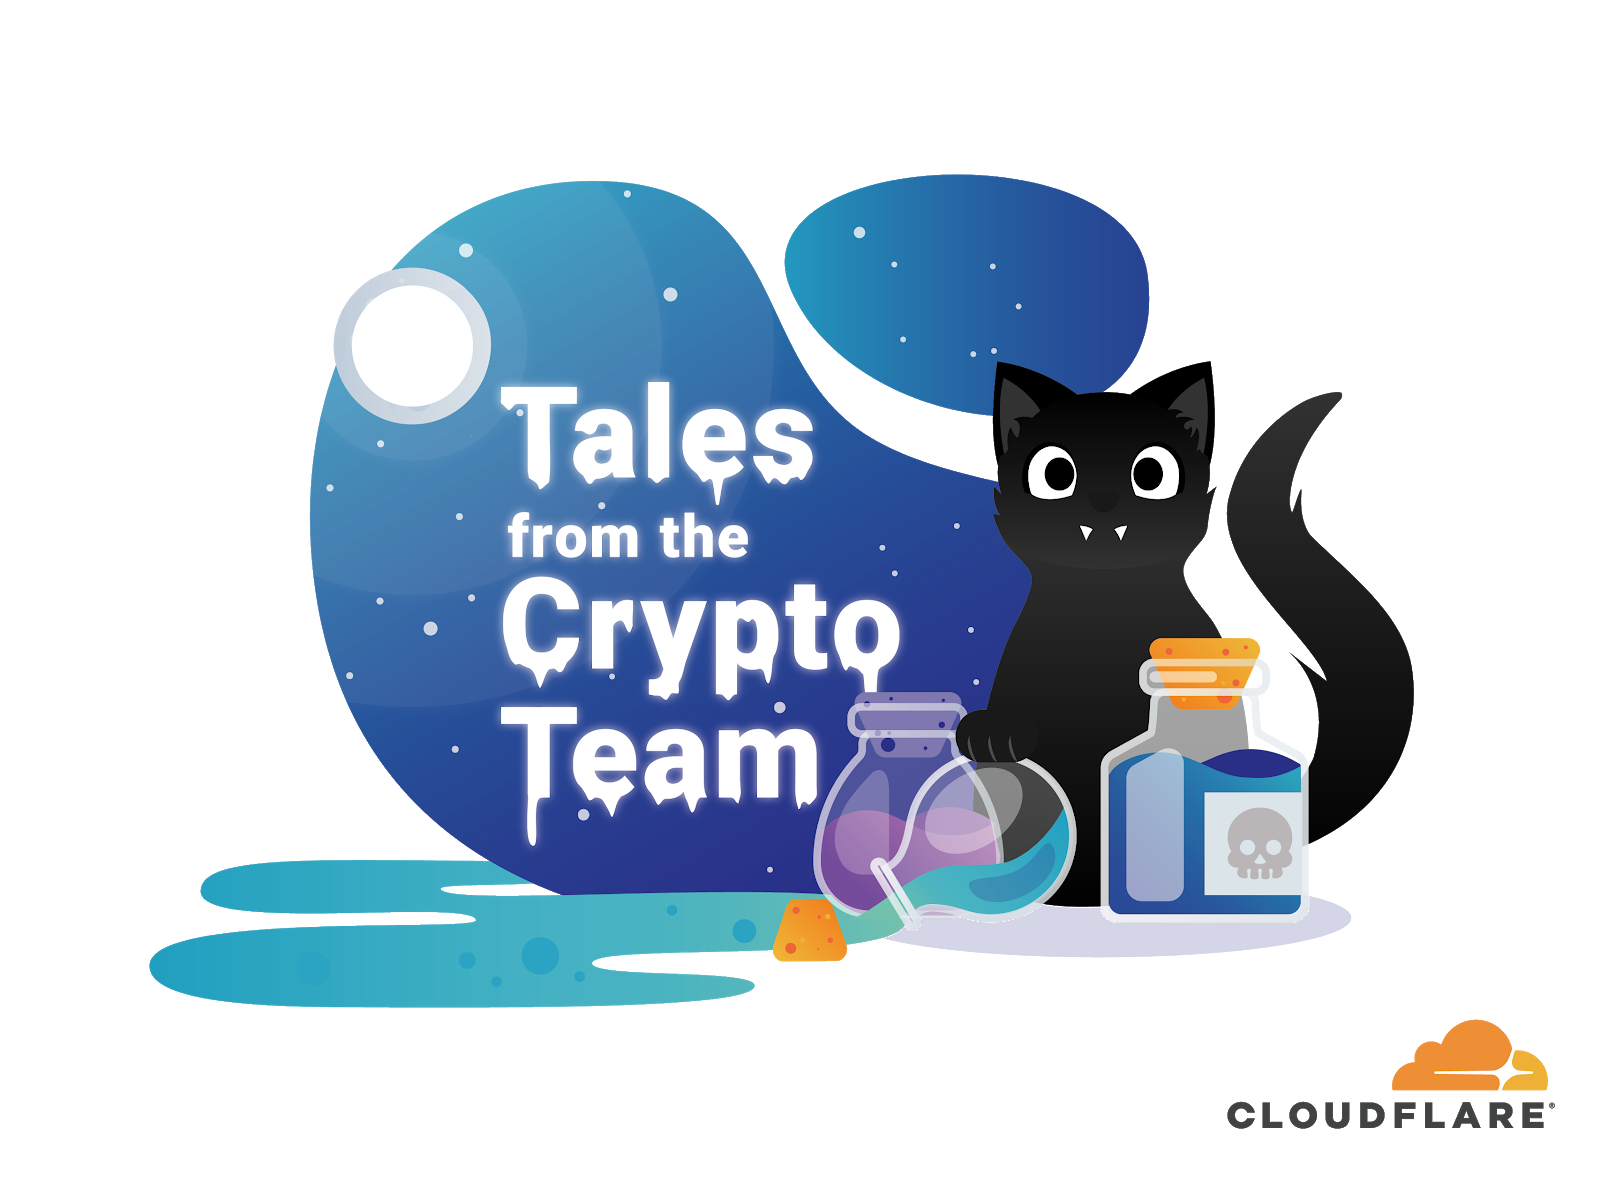 Tales from the Crypt(o team)